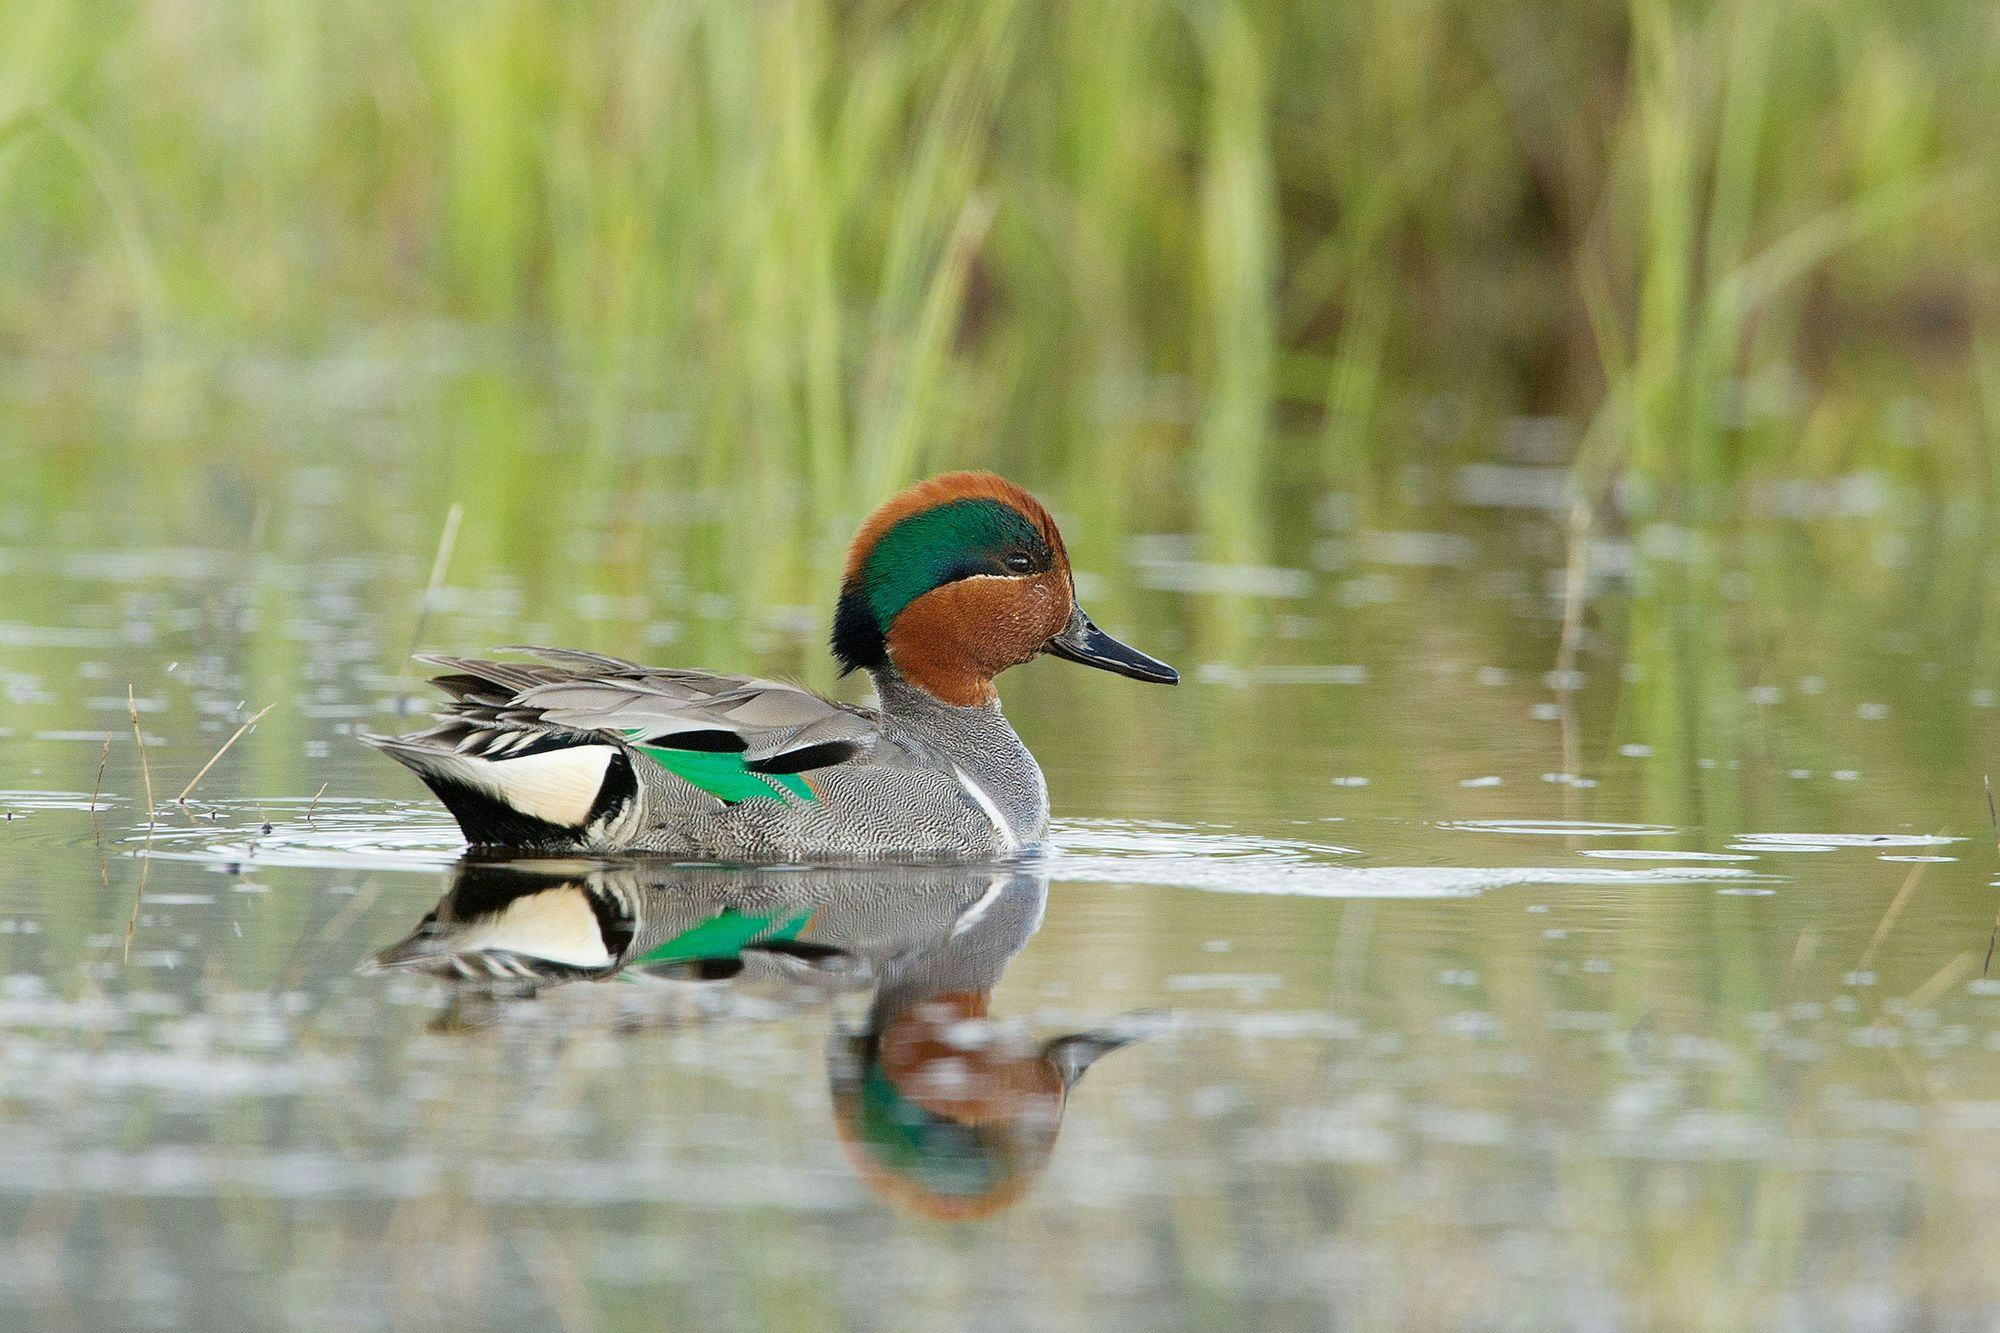 Ducks Unlimited wants new law to protect wetlands threatened by housing development